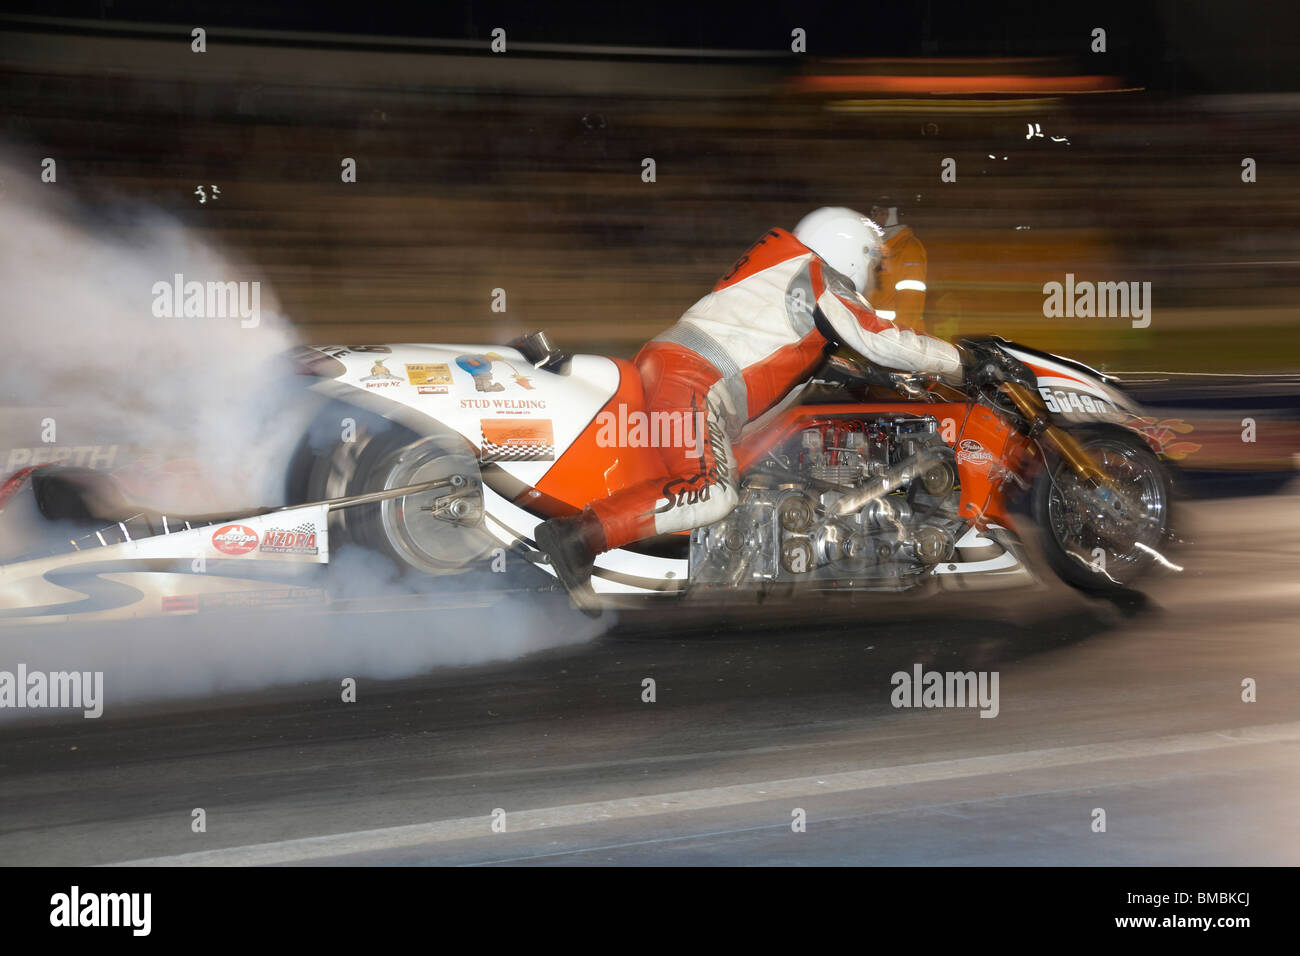 New Zealand motorcycle drag racer, Athol Williams, performs a burnout on his supercharged custom drag racing motorcycle Stock Photo